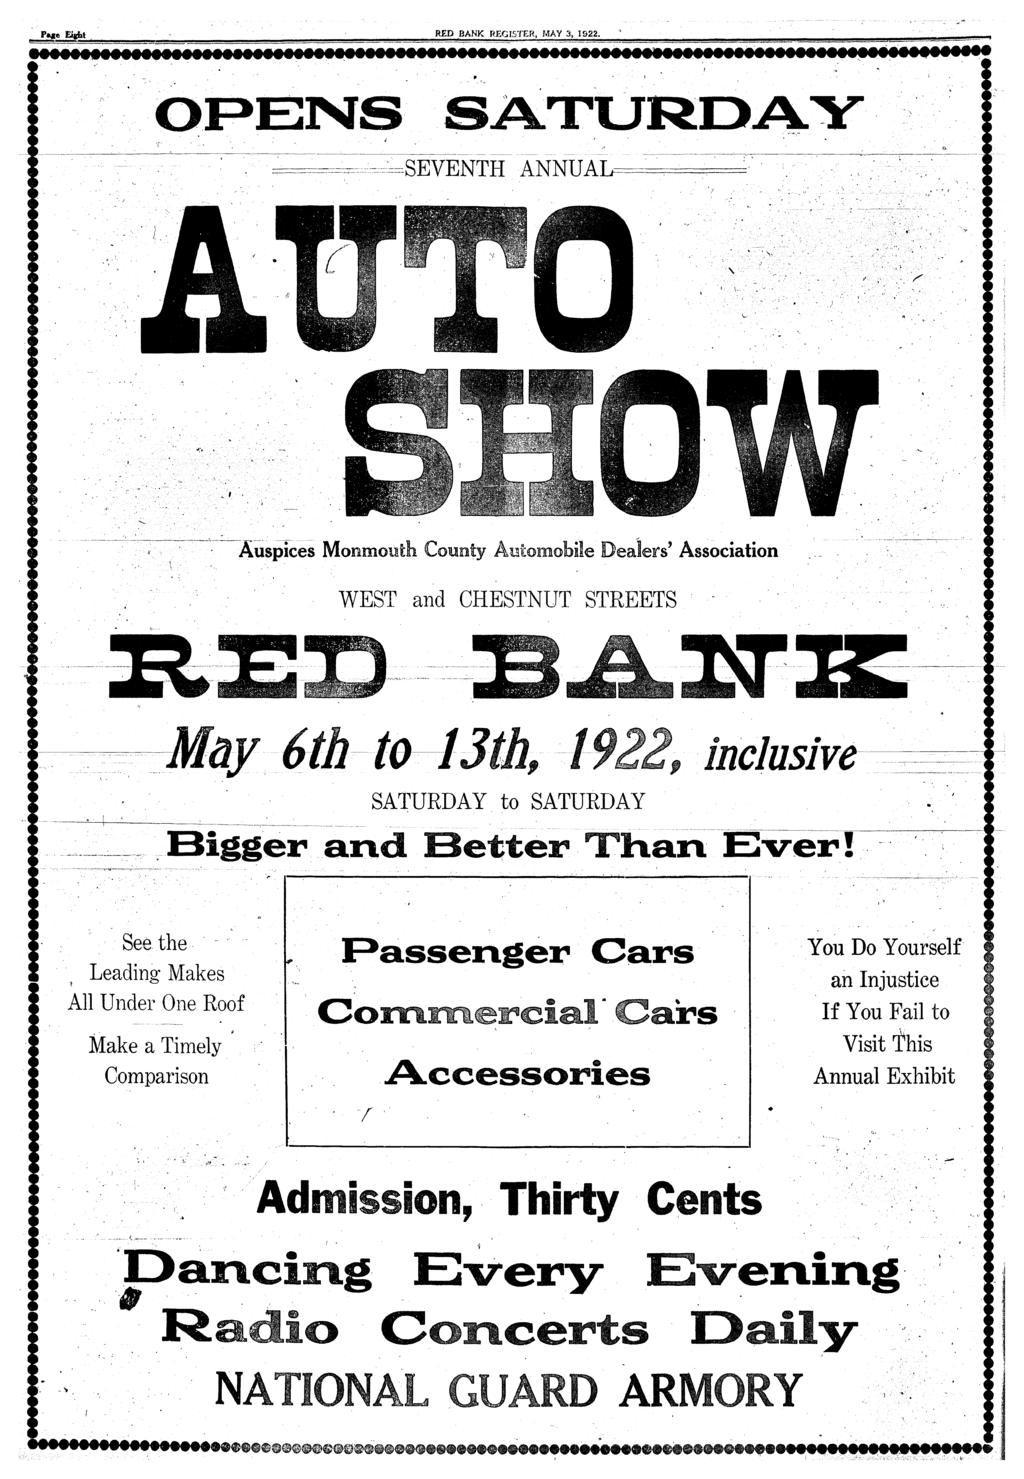 Page Egh RED BANK REGSTER, MA 3, 1922.